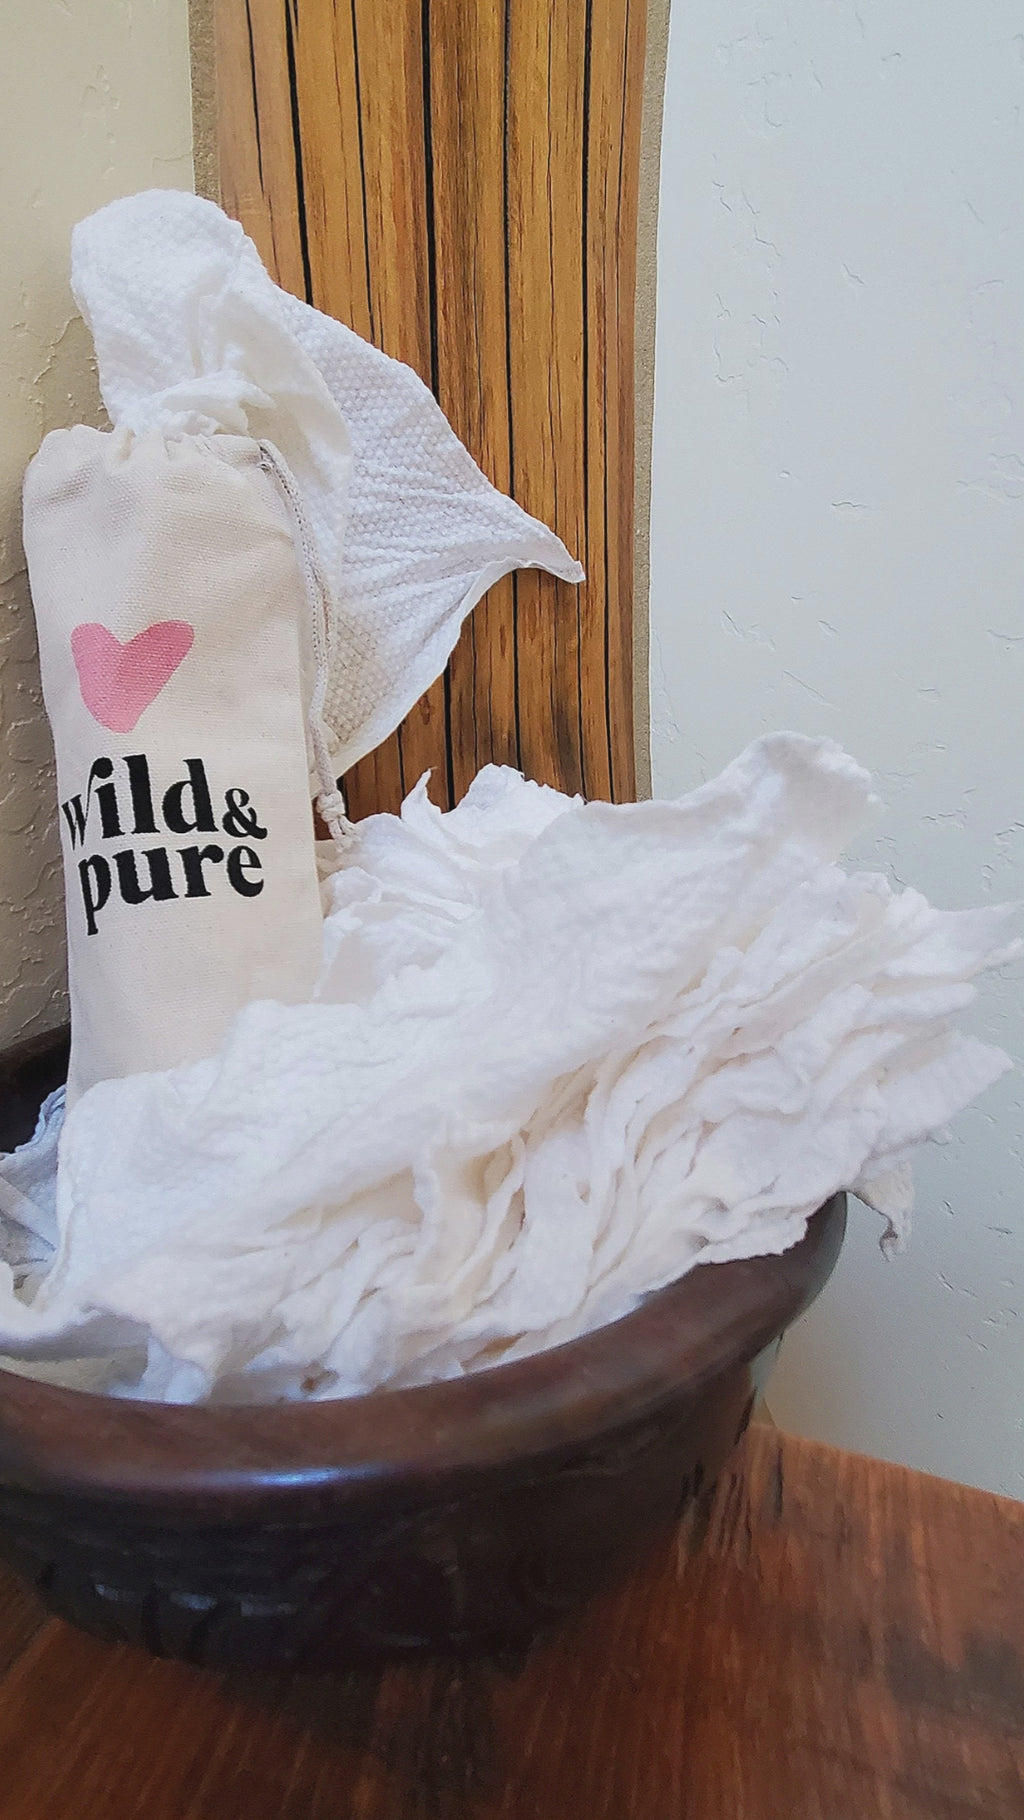 Video showing how Wild & Pure Dry Wipes are washable and dryable in a machine and can hold up to multiple uses.